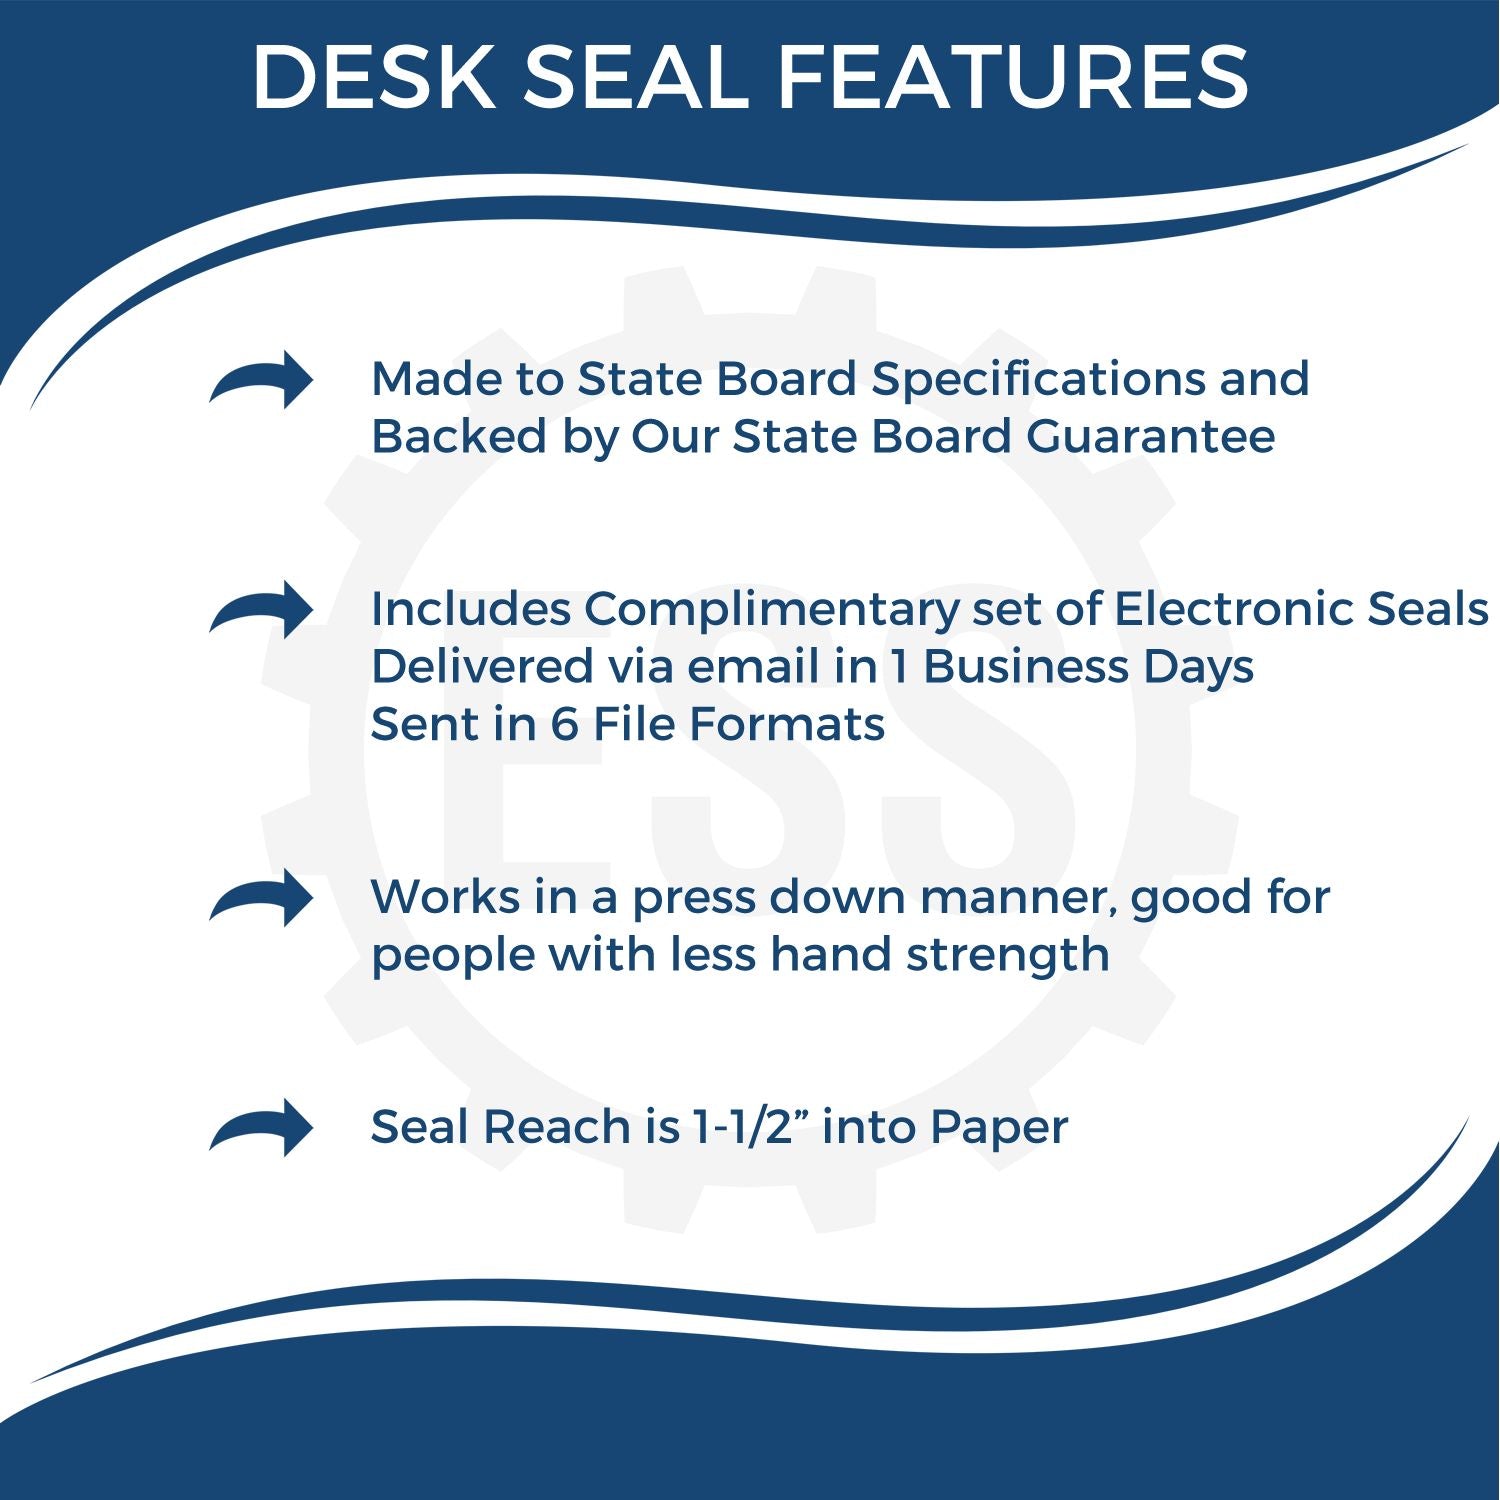 A picture of an infographic highlighting the selling points for the Iowa Engineer Desk Seal